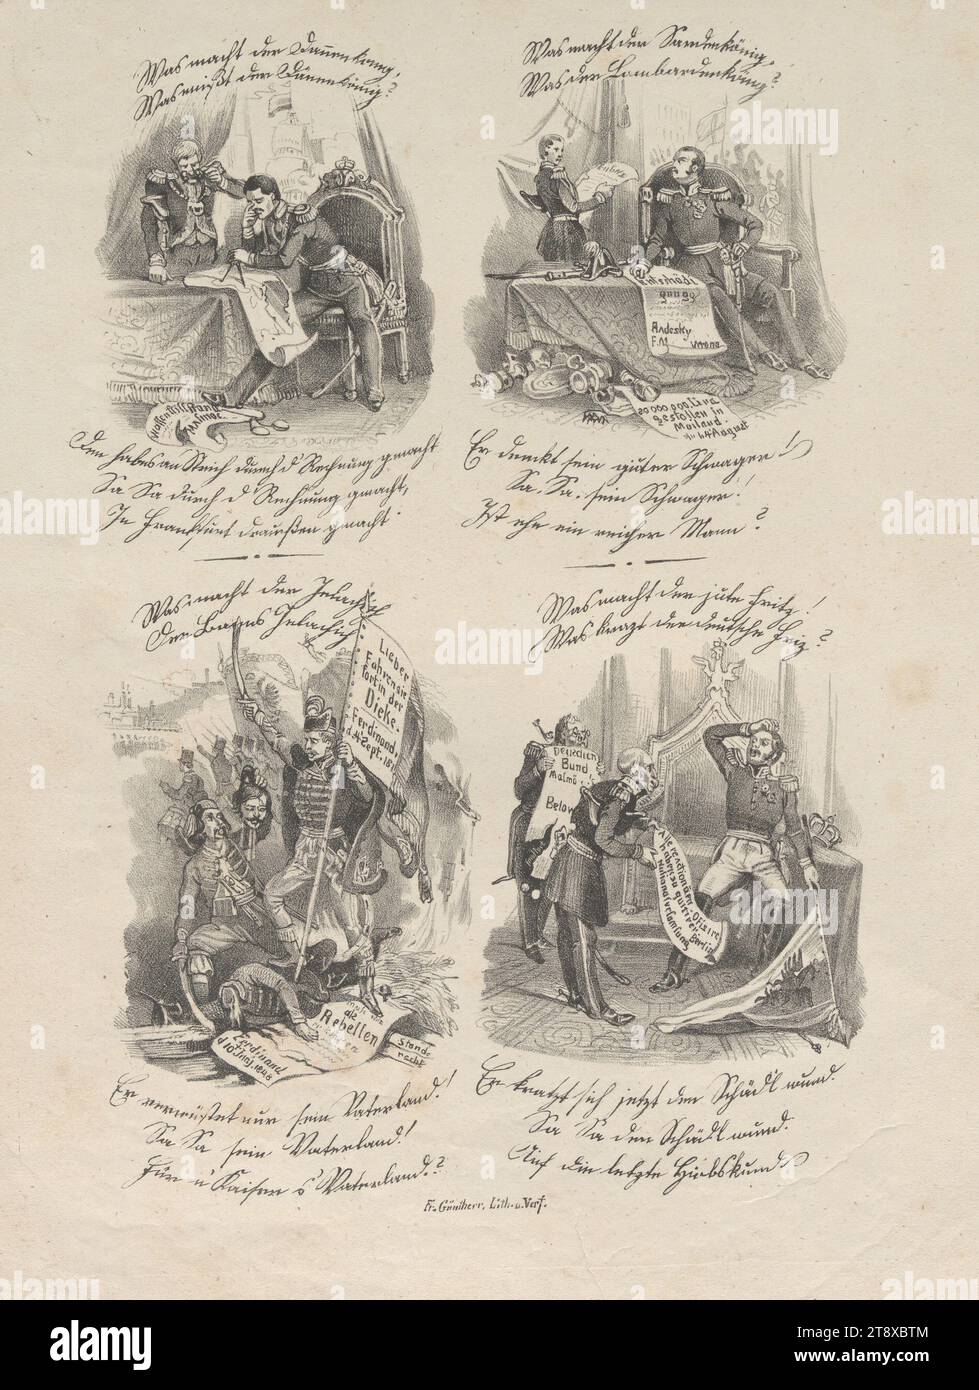 Caricature on the kings Frederick VII of Denmark, Charles Albert of Sardinia, Frederick William IV of Prussia and on the Croatian Banus Jelačić, Günther (Vienna), lithographer, 1848, paper, chalk-manner lithograph, height 34, 5 cm, width 26, 4 cm, Caricature, Satire, Revolutions of 1848, 1849, king; emperor, ruler, sovereign, The Vienna Collection Stock Photo